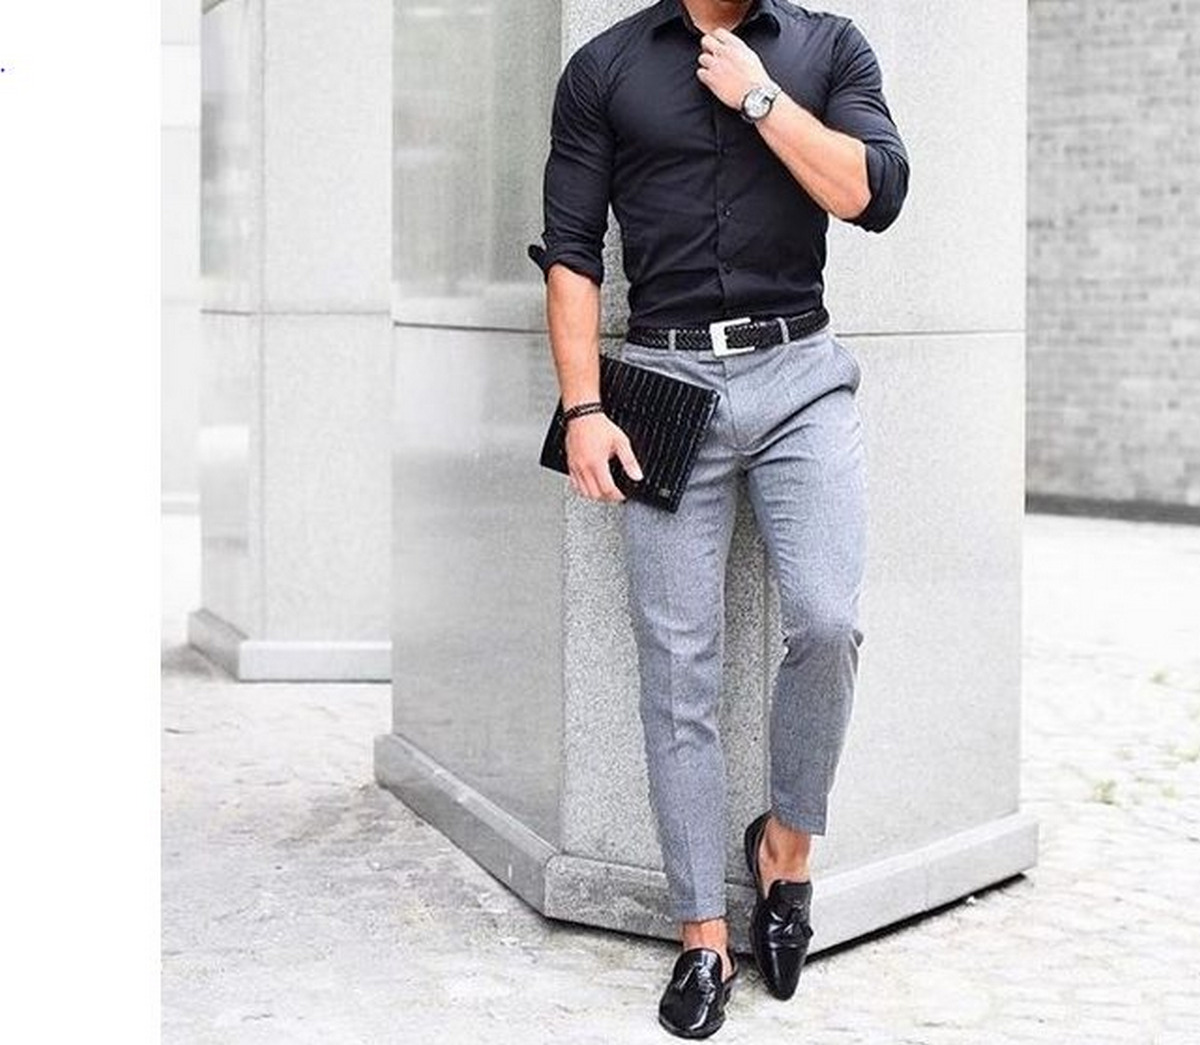 Chris Mehan su Instagram Which color pants do you like better with this black  shirt Light gray or dark g  Formal men outfit Mens fashion suits  Mens outfits